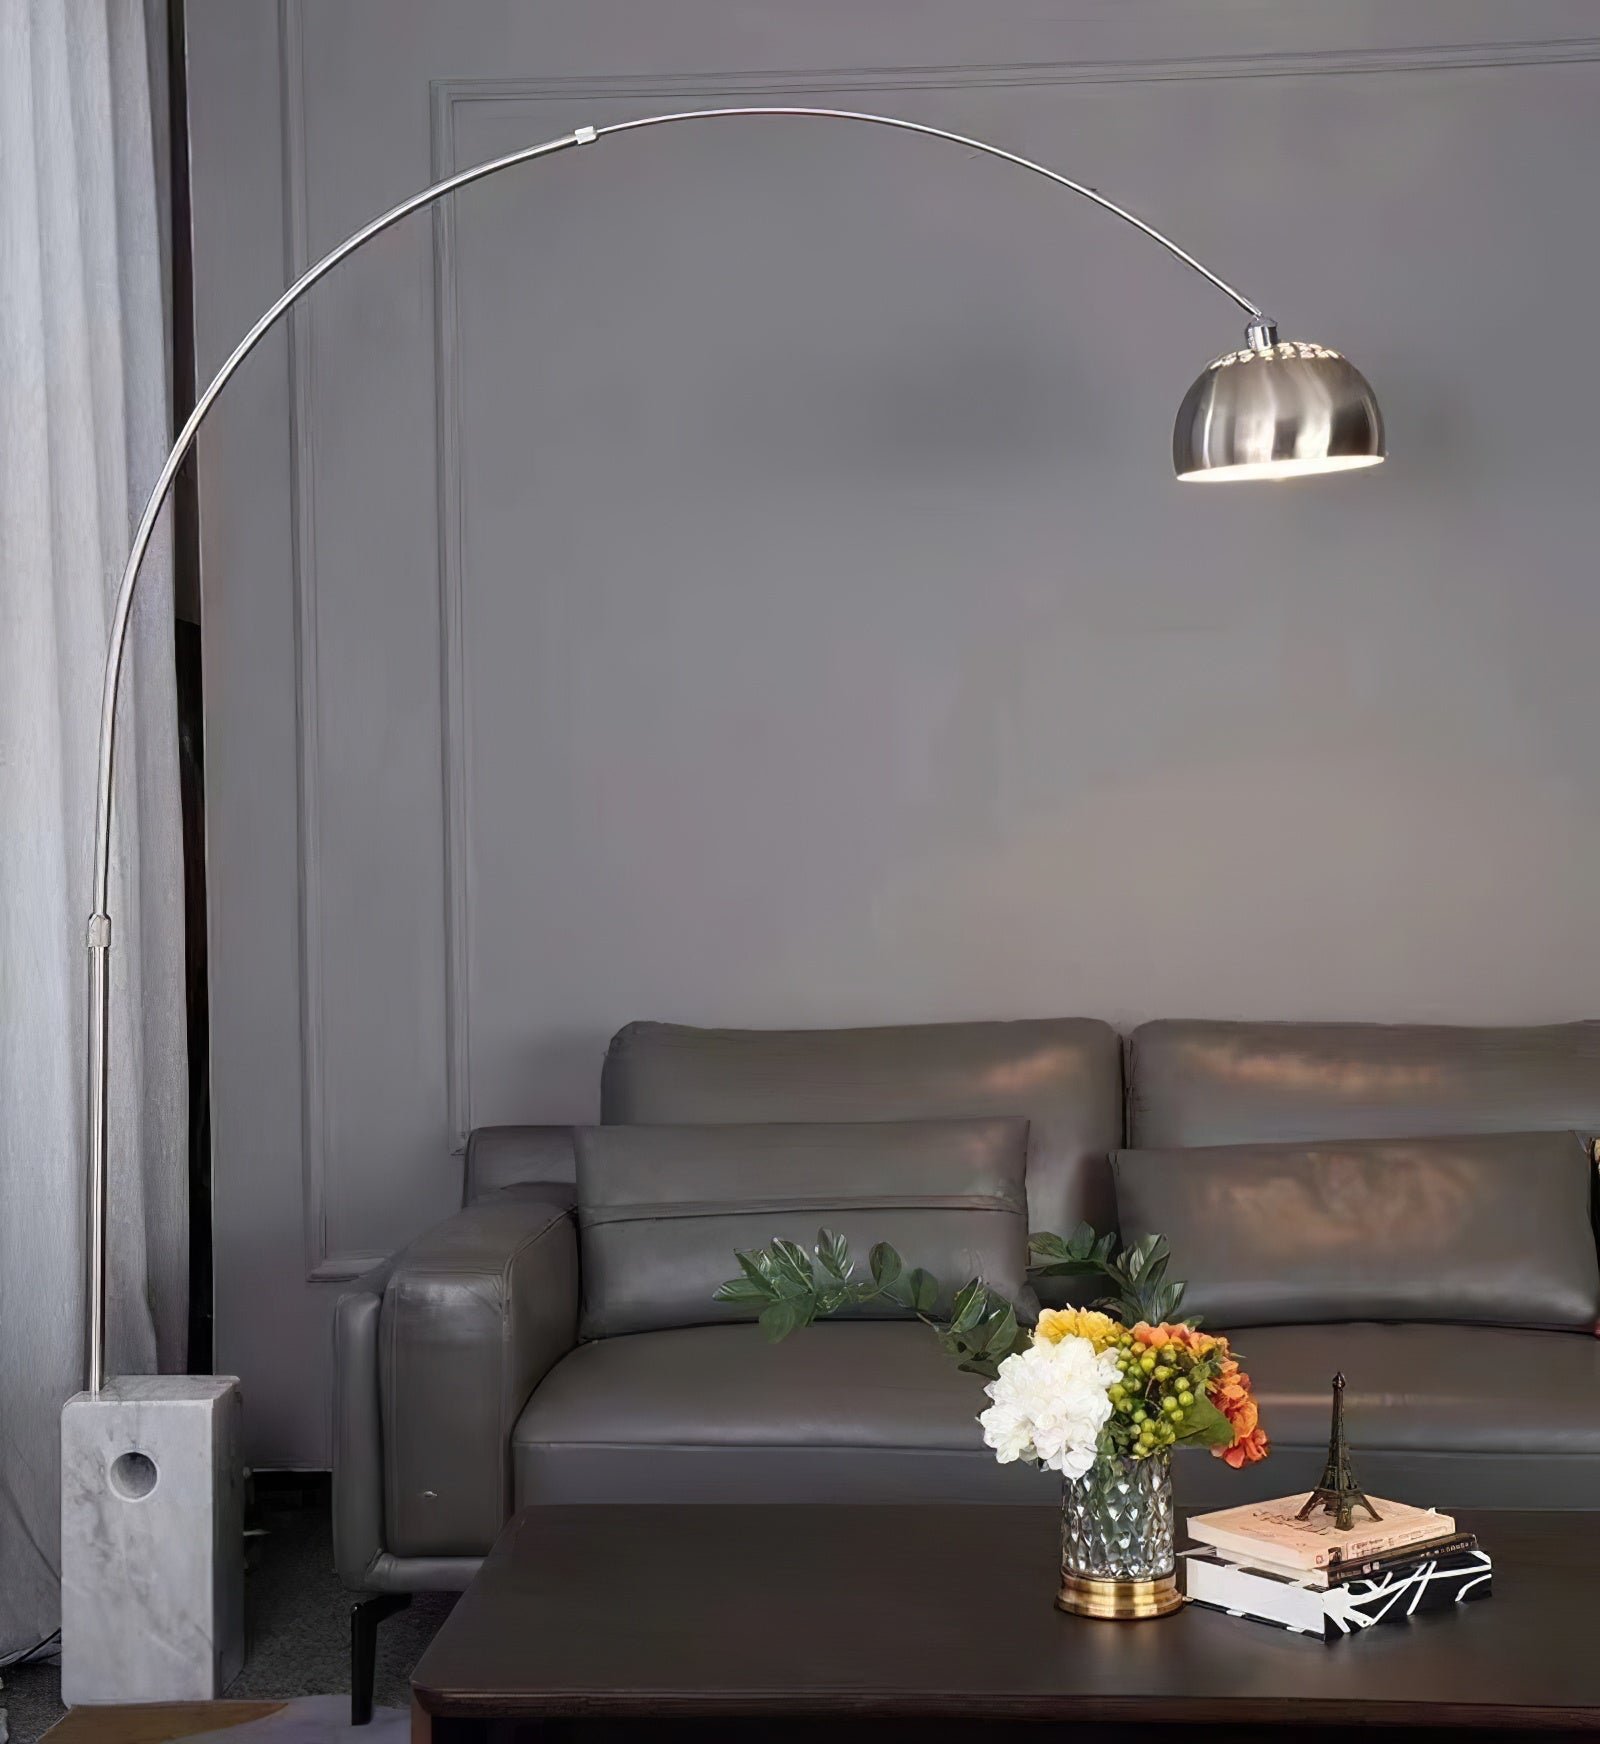 Arco Floor Lamp with 66.9" Width x 74.8" Height (170cm x 190cm), Featuring Round Pipe and EU Plug